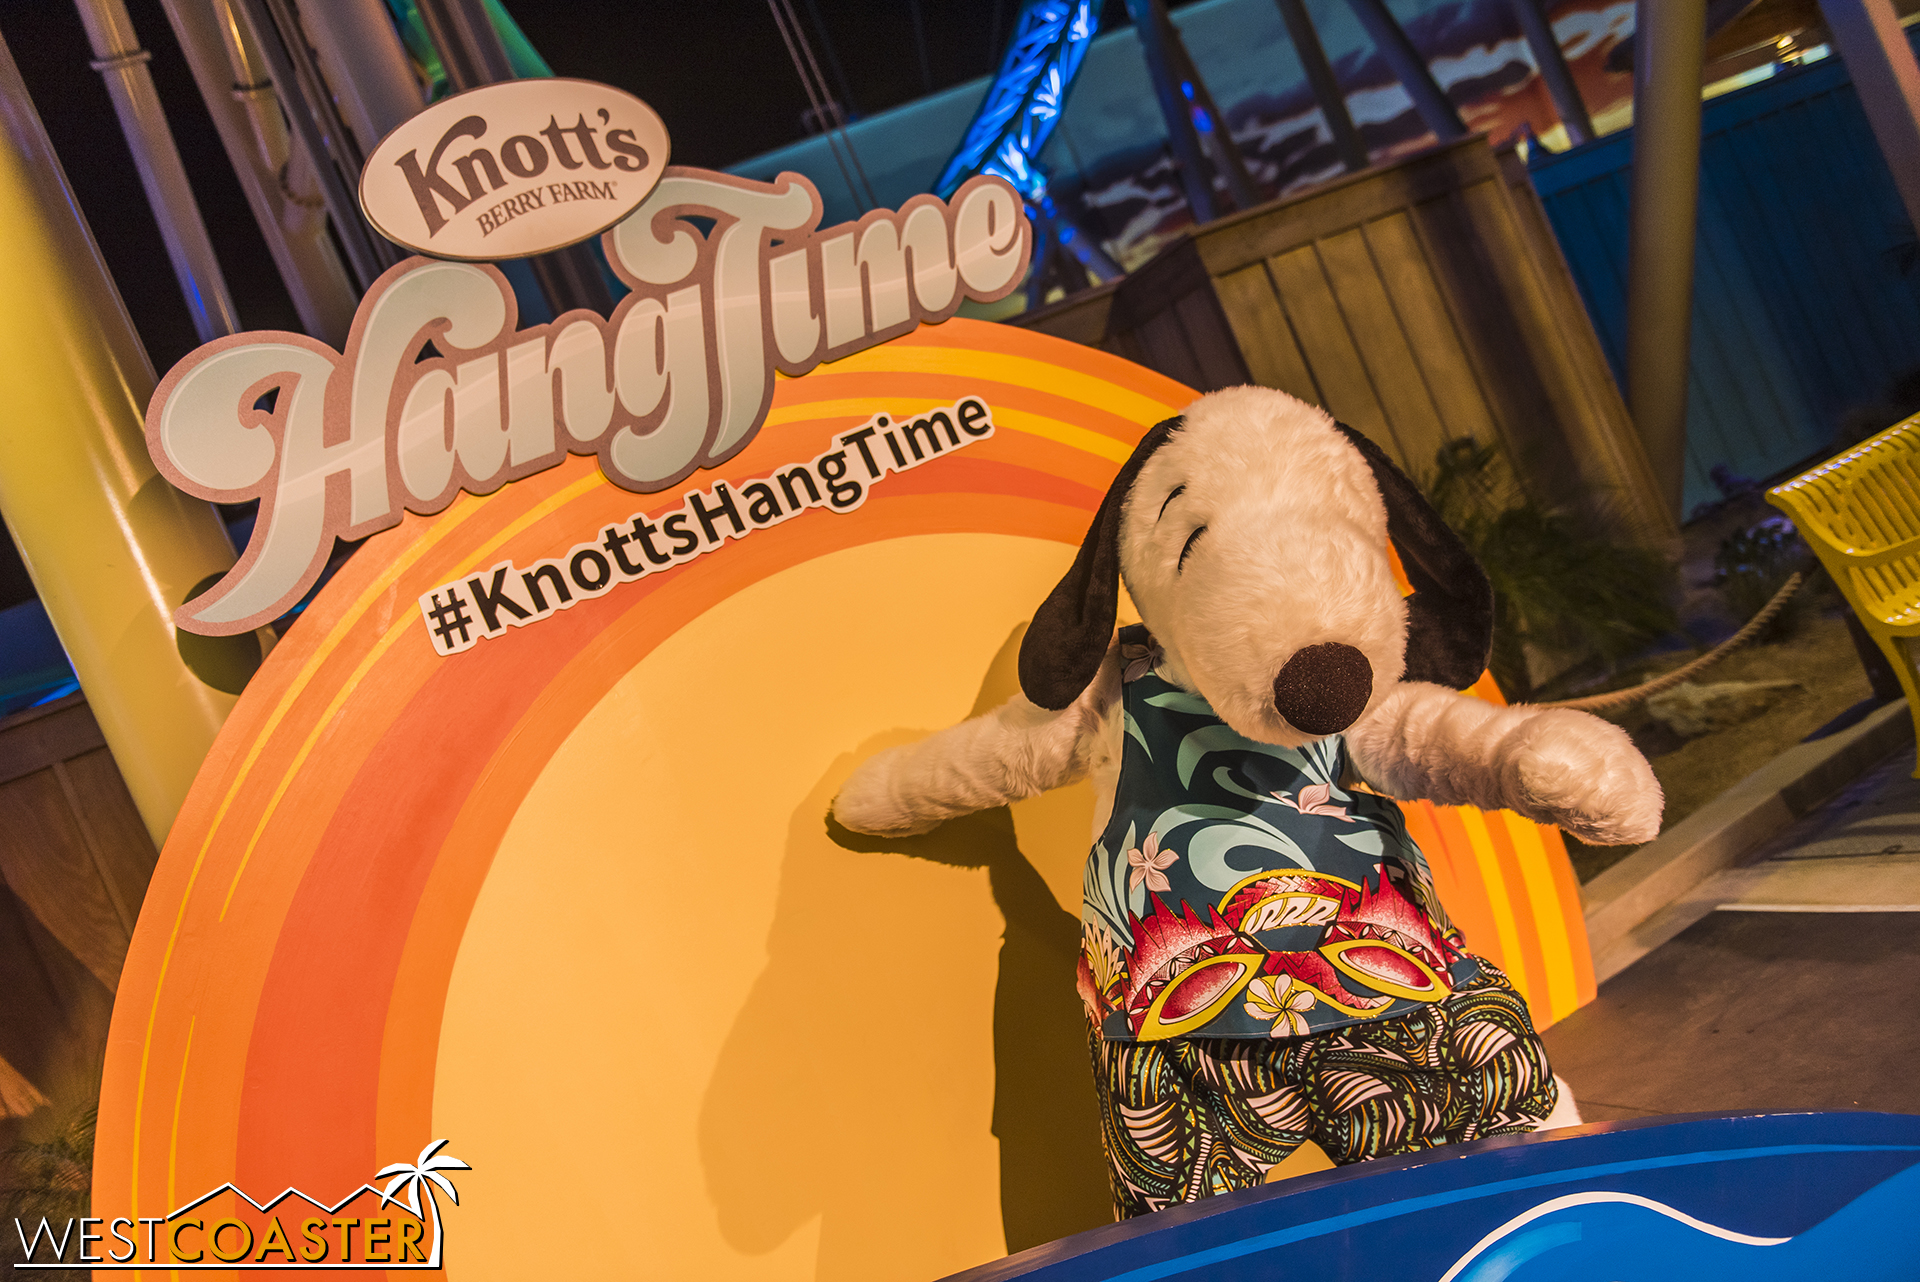  Throughout the night, Snoopy would show up for photo ops. 